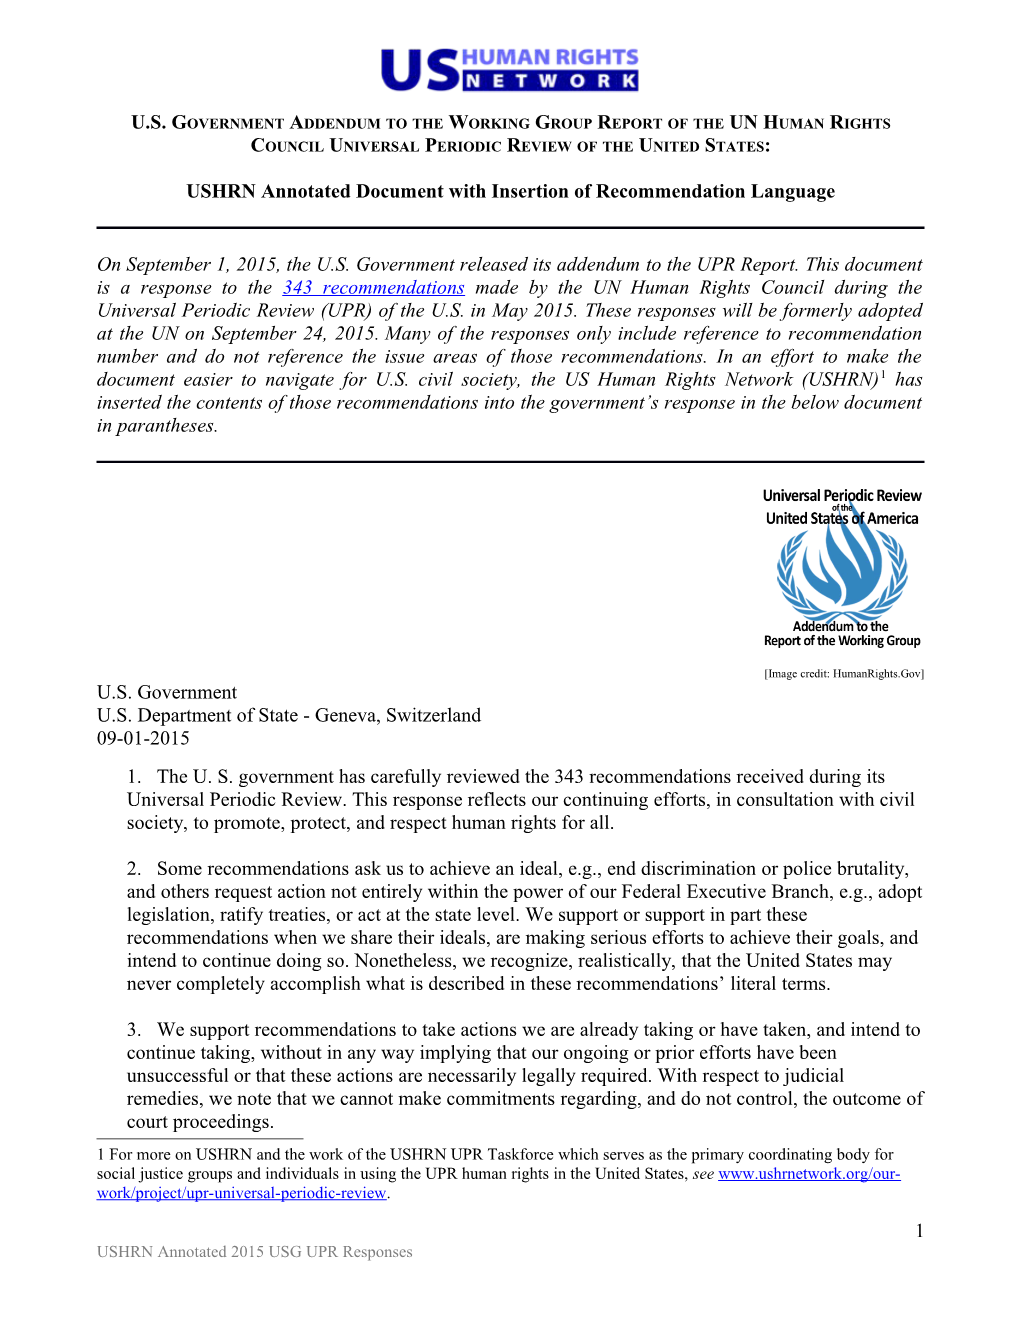 USHRN Annotated Document with Insertion of Recommendation Language